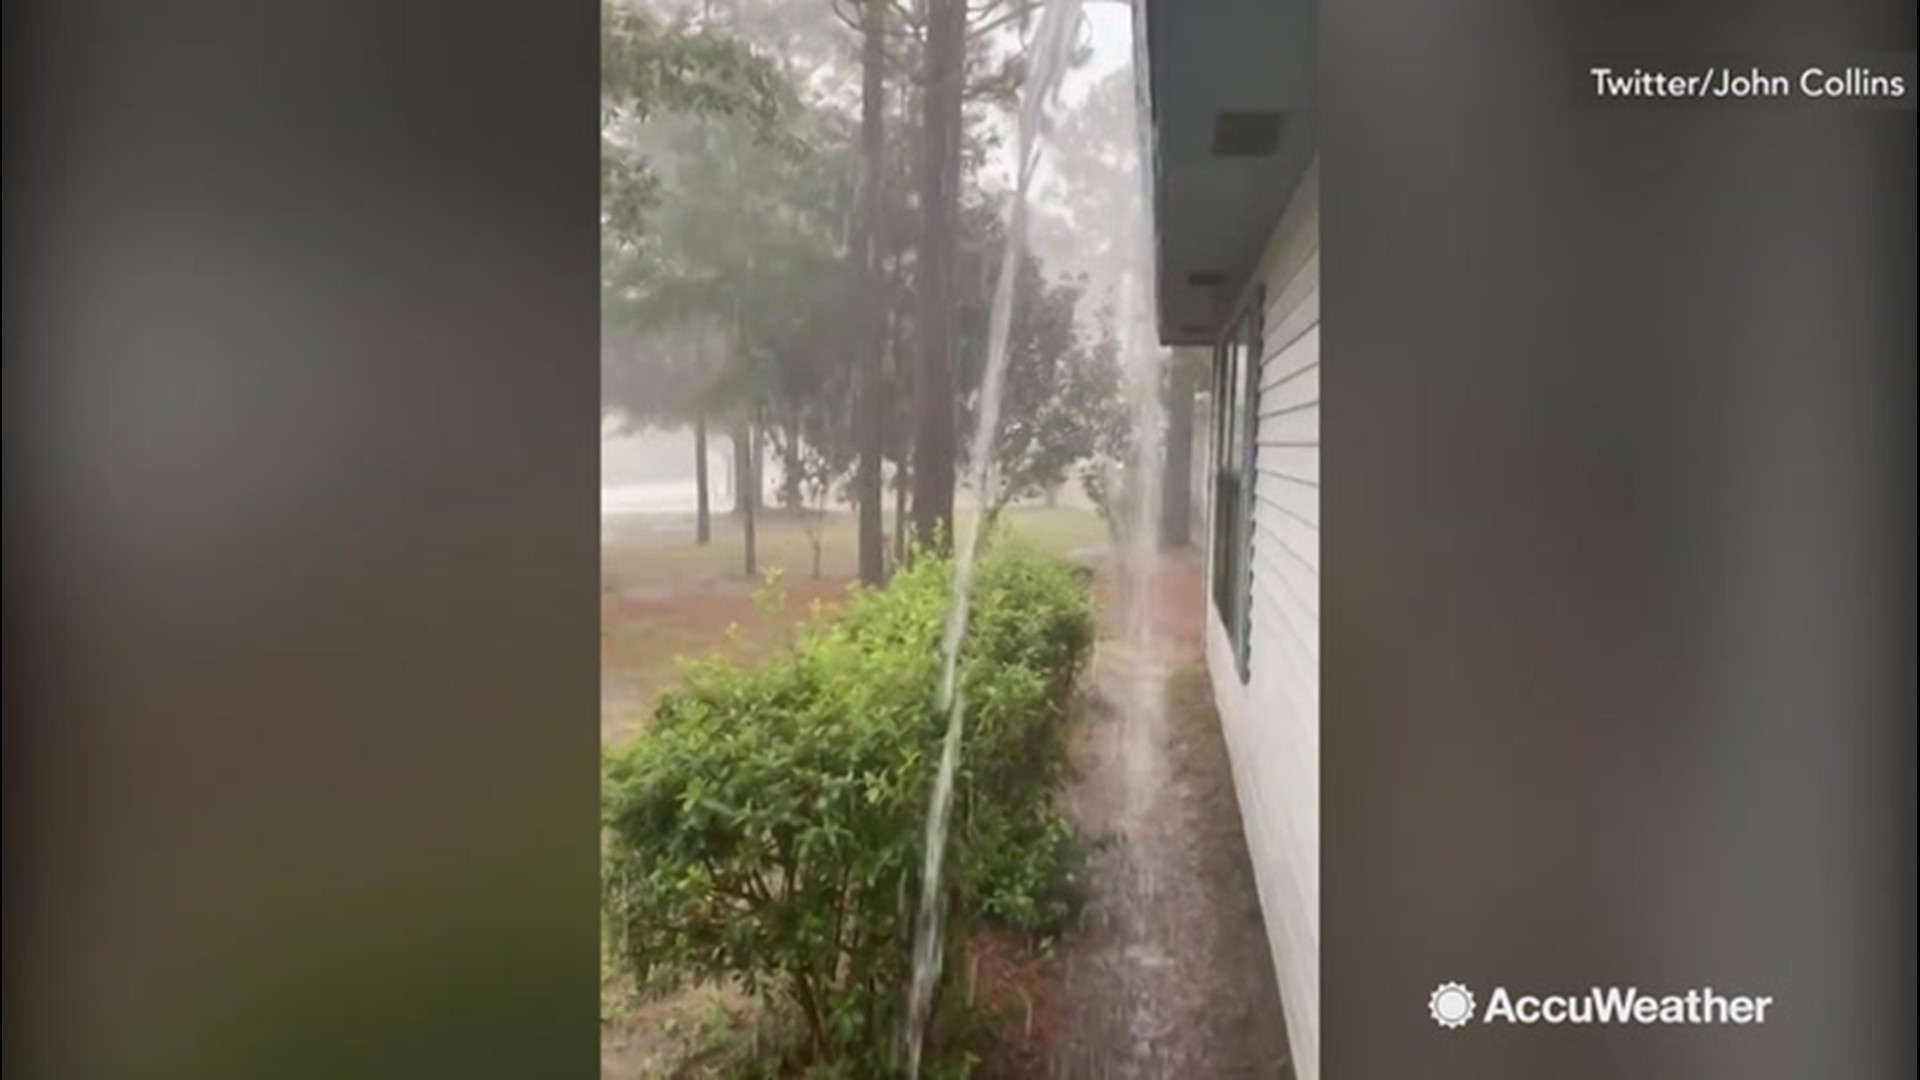 Crestview, Florida, was hit with fairly heavy rain on Tuesday, Aug. 13, overwhelming gutters far and wide.